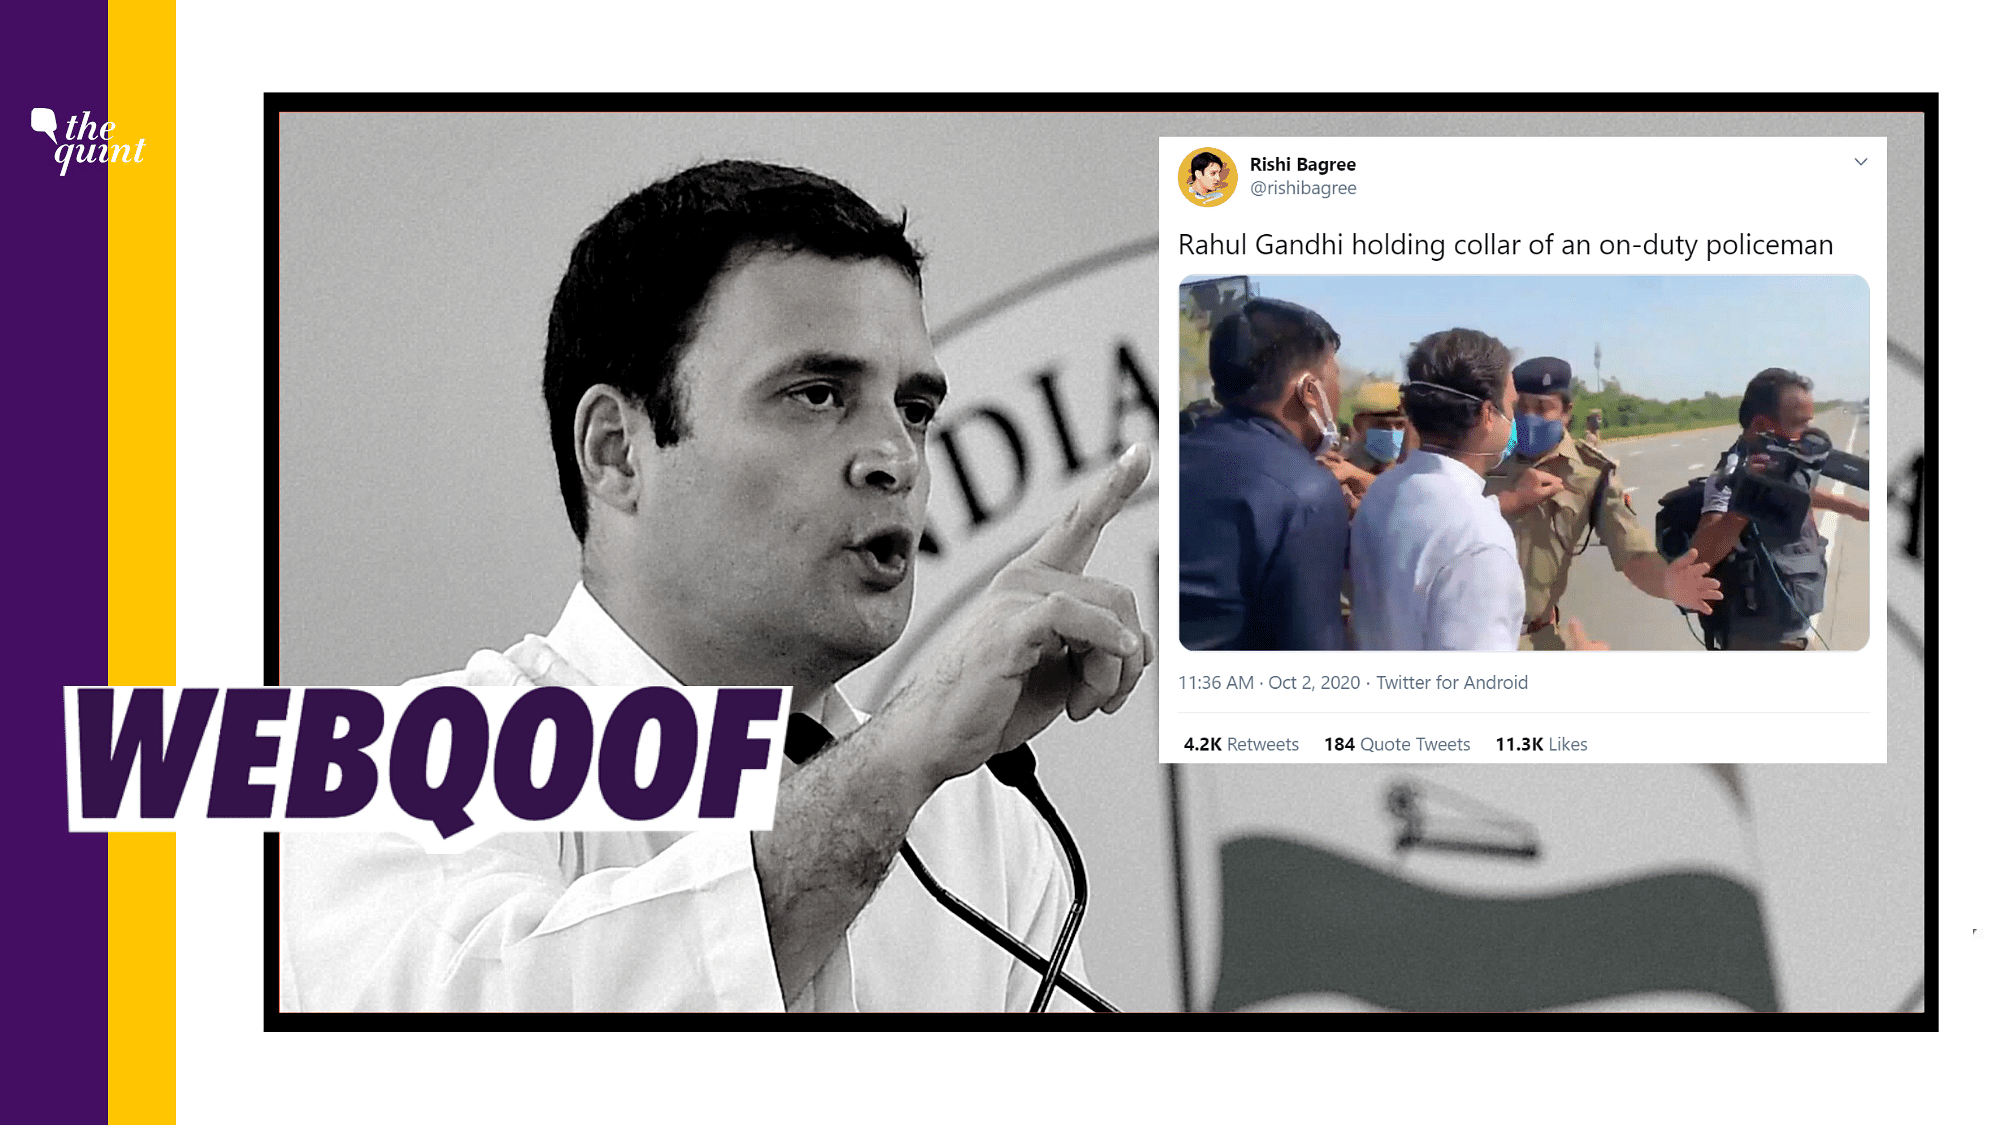 Hathras Fact-Check: A picture of Congress leader Rahul Gandhi has gone viral on social media accusing him of man-handling an on-duty police officer.